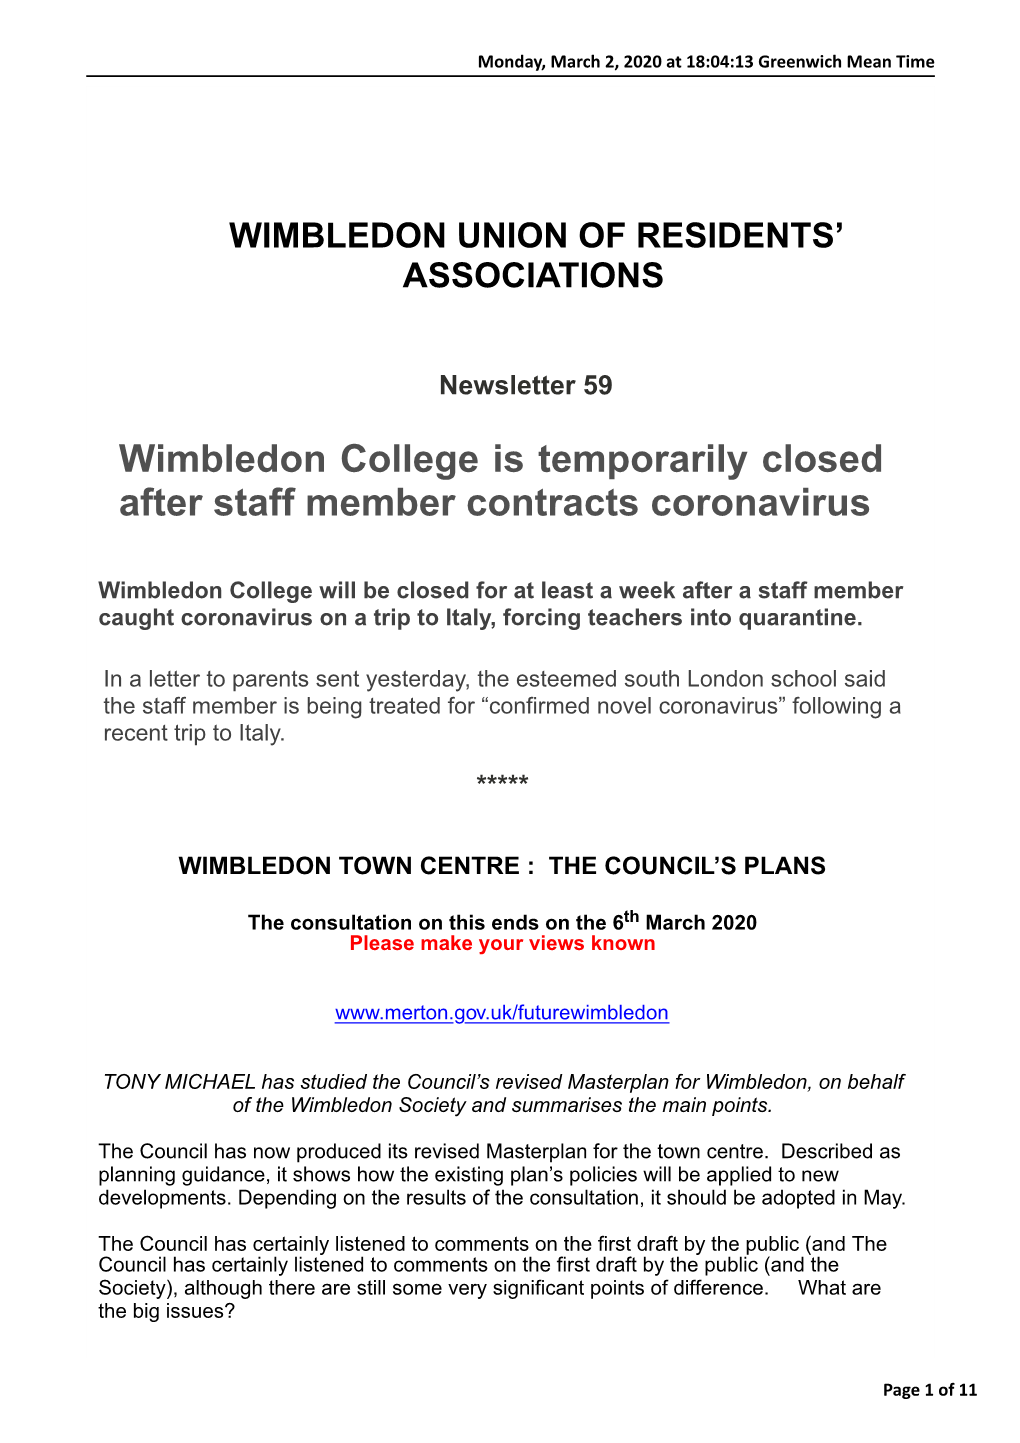 Wimbledon College Is Temporarily Closed After Staff Member Contracts Coronavirus